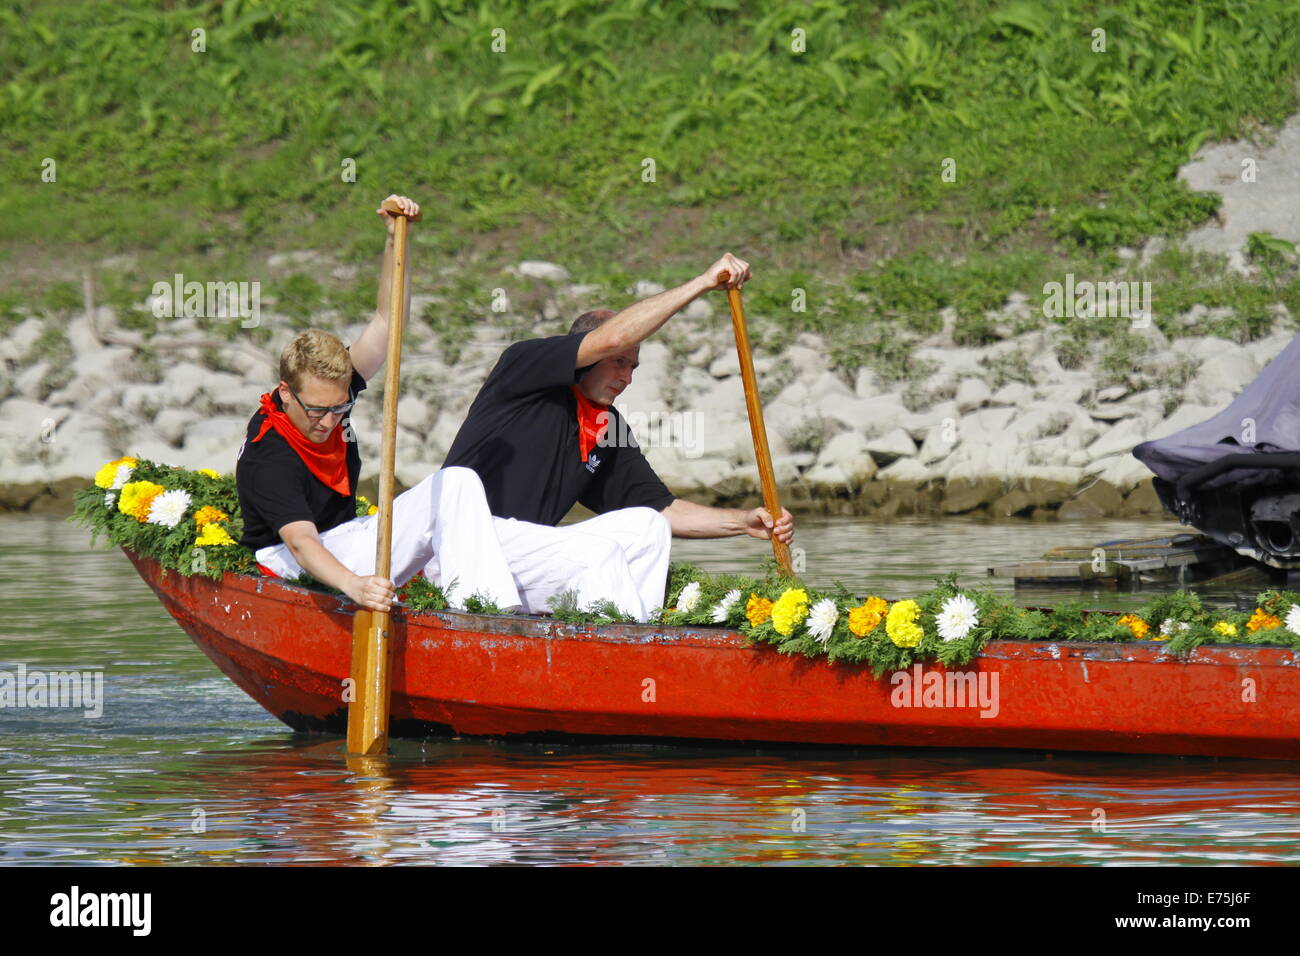 Two rowers row the boat to next attack. Fifteen teams each consisting of 2 rowers and one man fighting with a lance, competed in the 65th anniversary Fischerstechen (Fishermen's Joust) held on the final day of the Backfischfest. © Michael Debets/Pacific Press/Alamy Live News Stock Photo